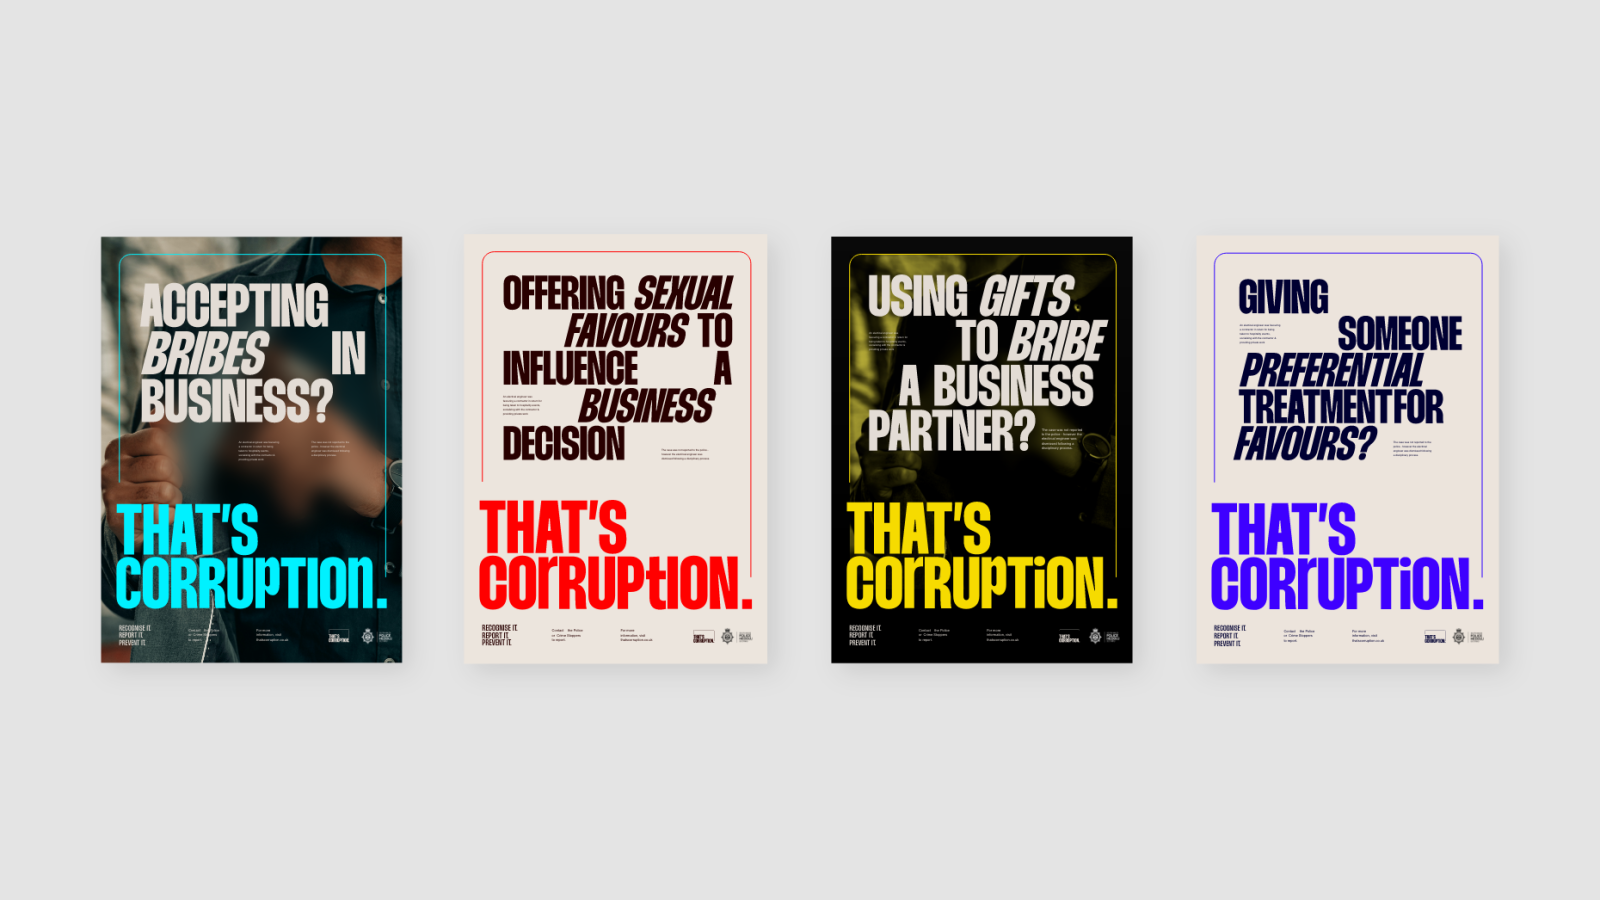 Four posters with bold text addressing corrupt practices in business: accepting bribes, offering sexual favors, using gifts, and providing preferential treatment, each labeled as corruption by a brand design agency.